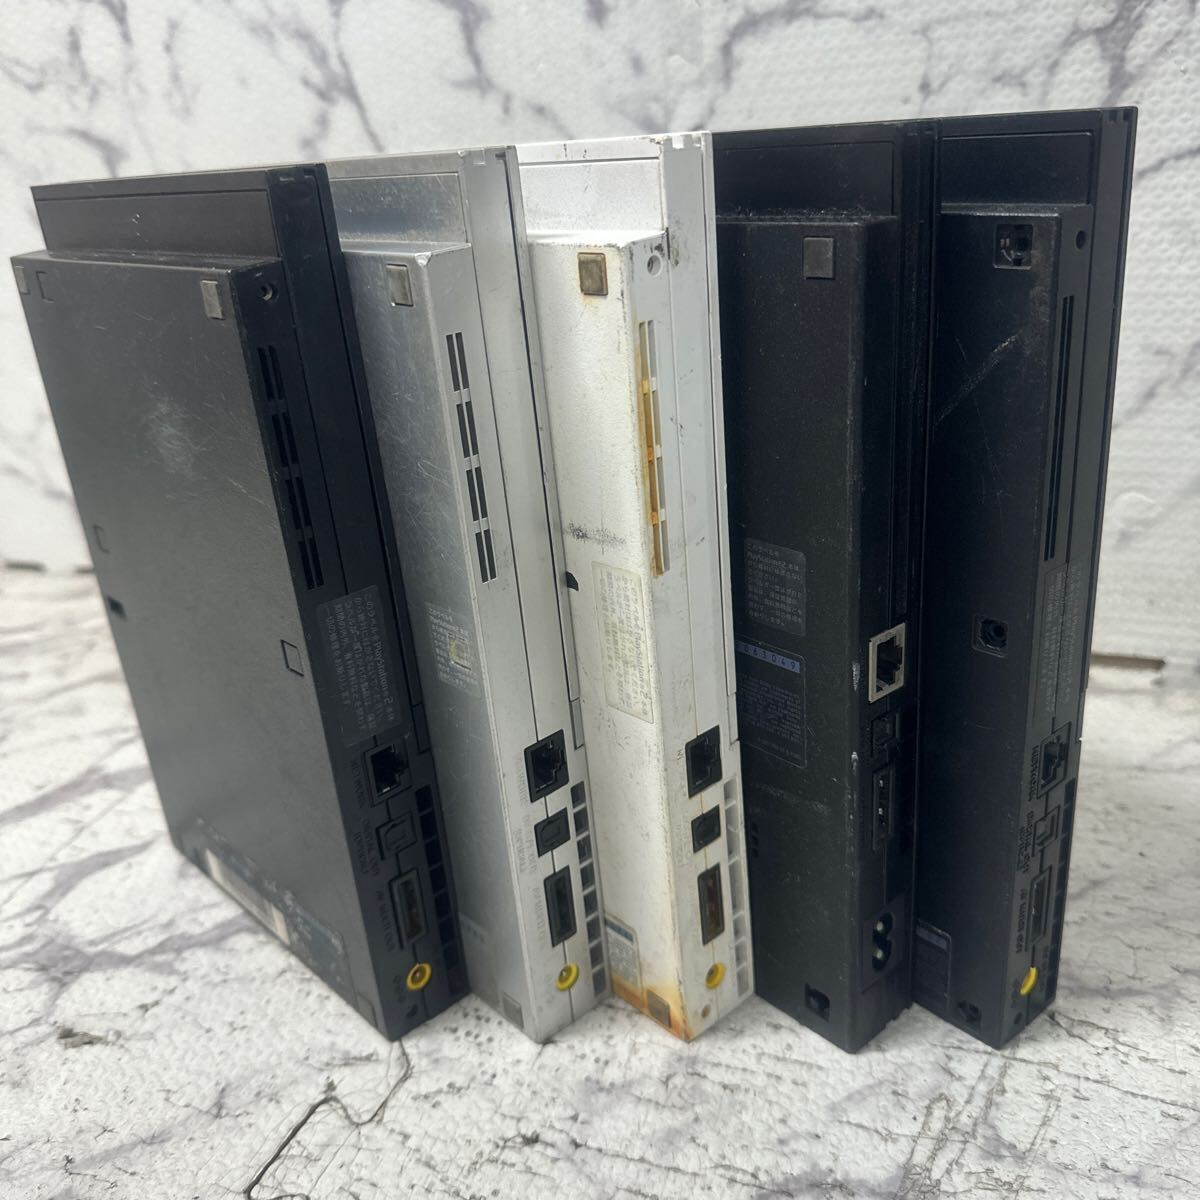 MYG-1654 激安 ゲー厶機 本体 SONY PlayStation2 PS2 SCPH-70000 SCPH-75000 SCPH-77000 SCPH-90000 5点 4台通電OK 1台通電NG ジャンク　_画像10